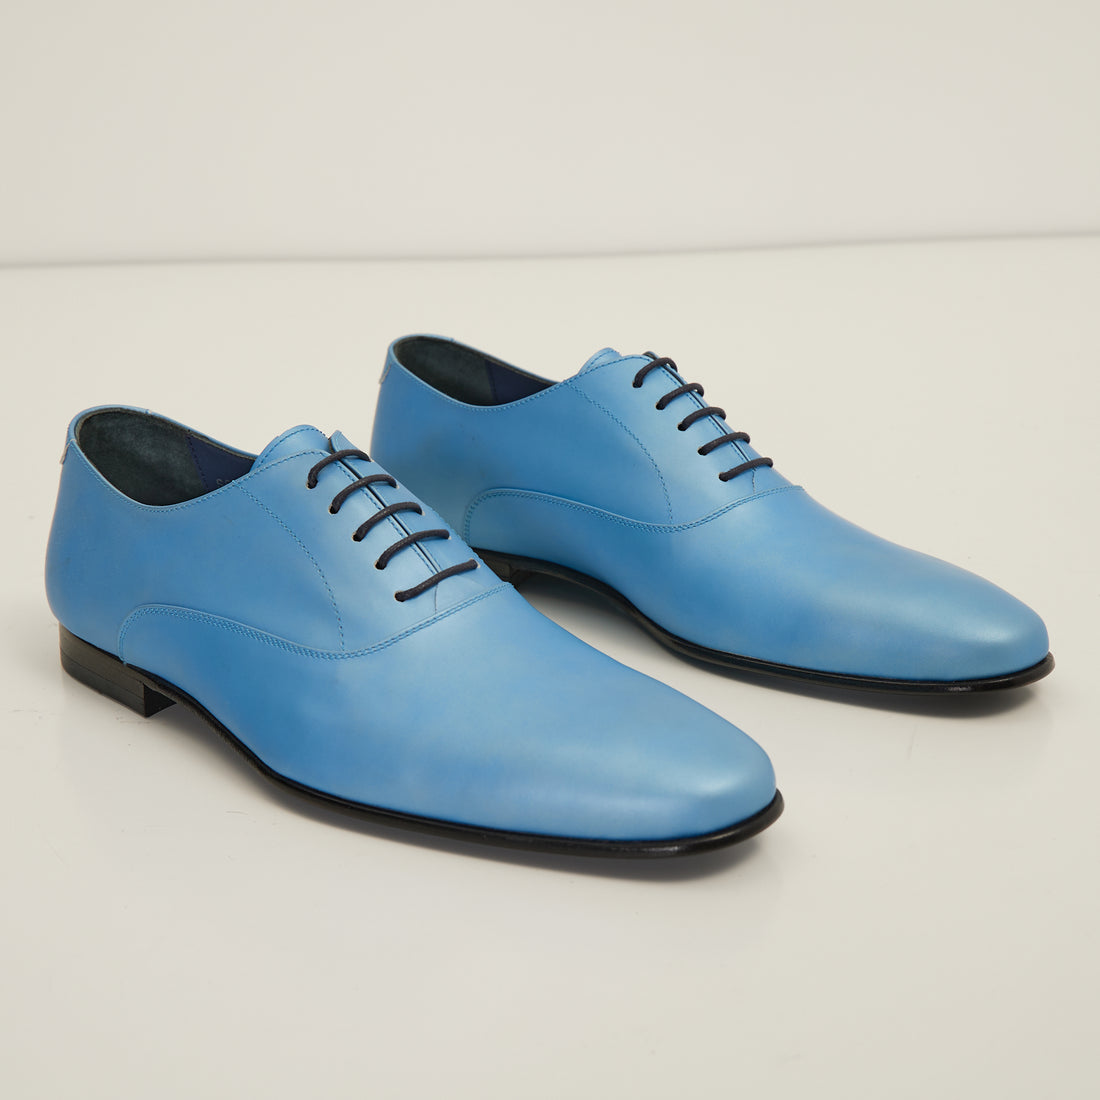 N° D1018 PATENT LEATHER OXFORDS - METALLIC SKY BLUE